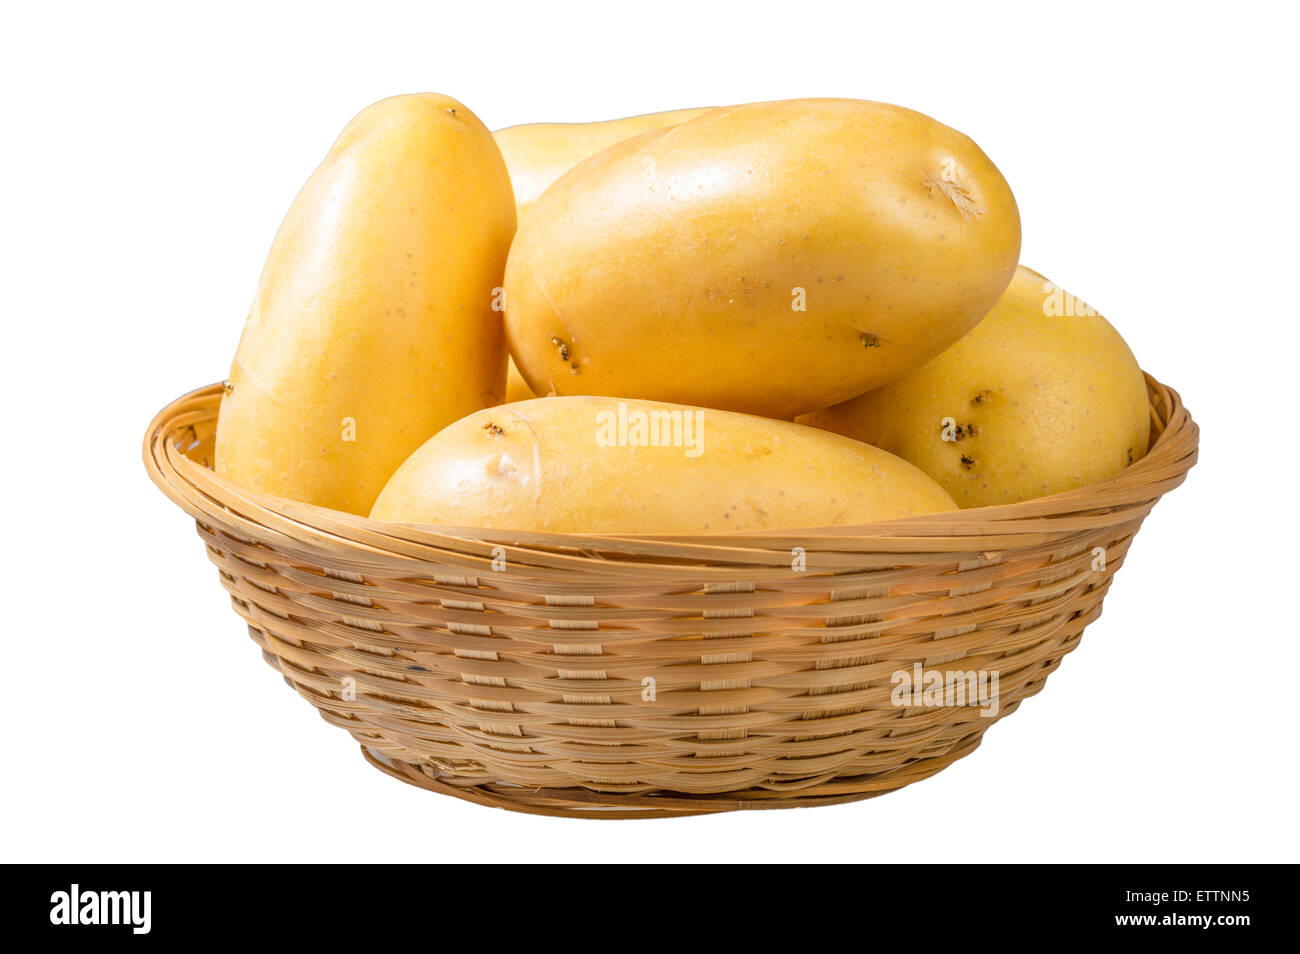 White potatoes fresh picked in wicker bowl isolated on white Stock Photo